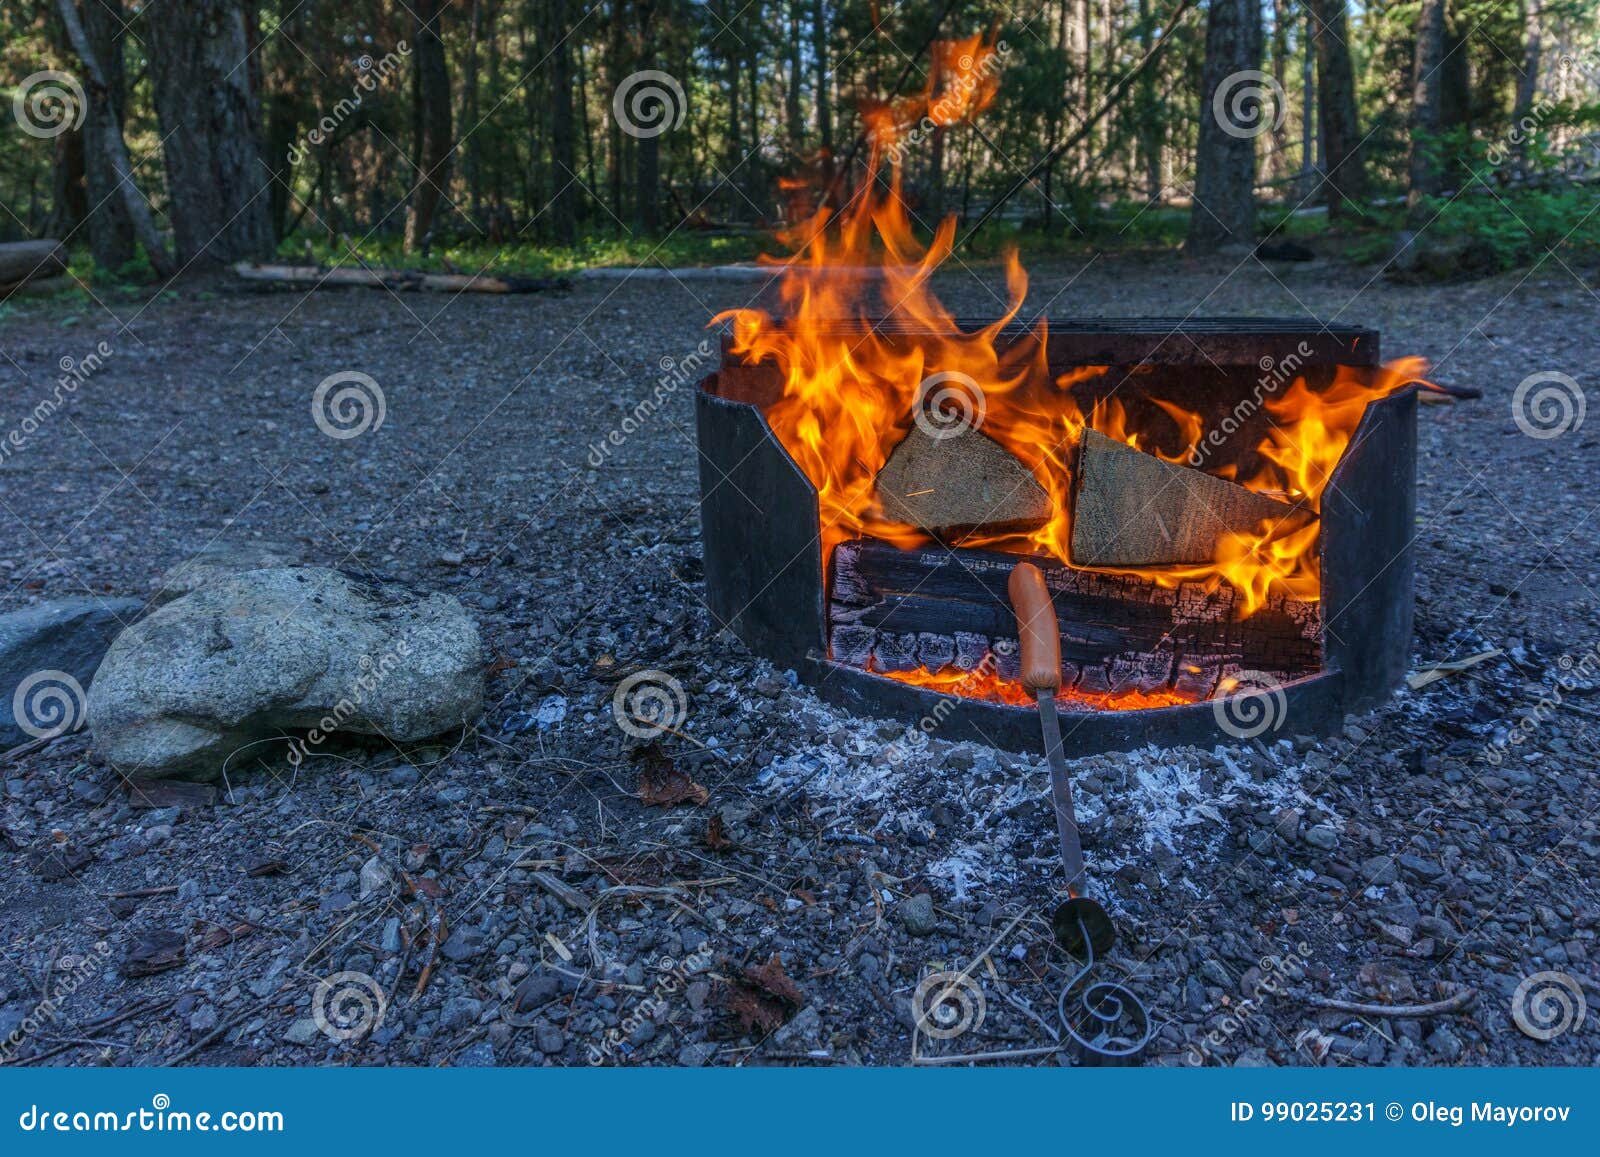 Campfire and Firewood at Camping Site in the Forest British Columbia ...